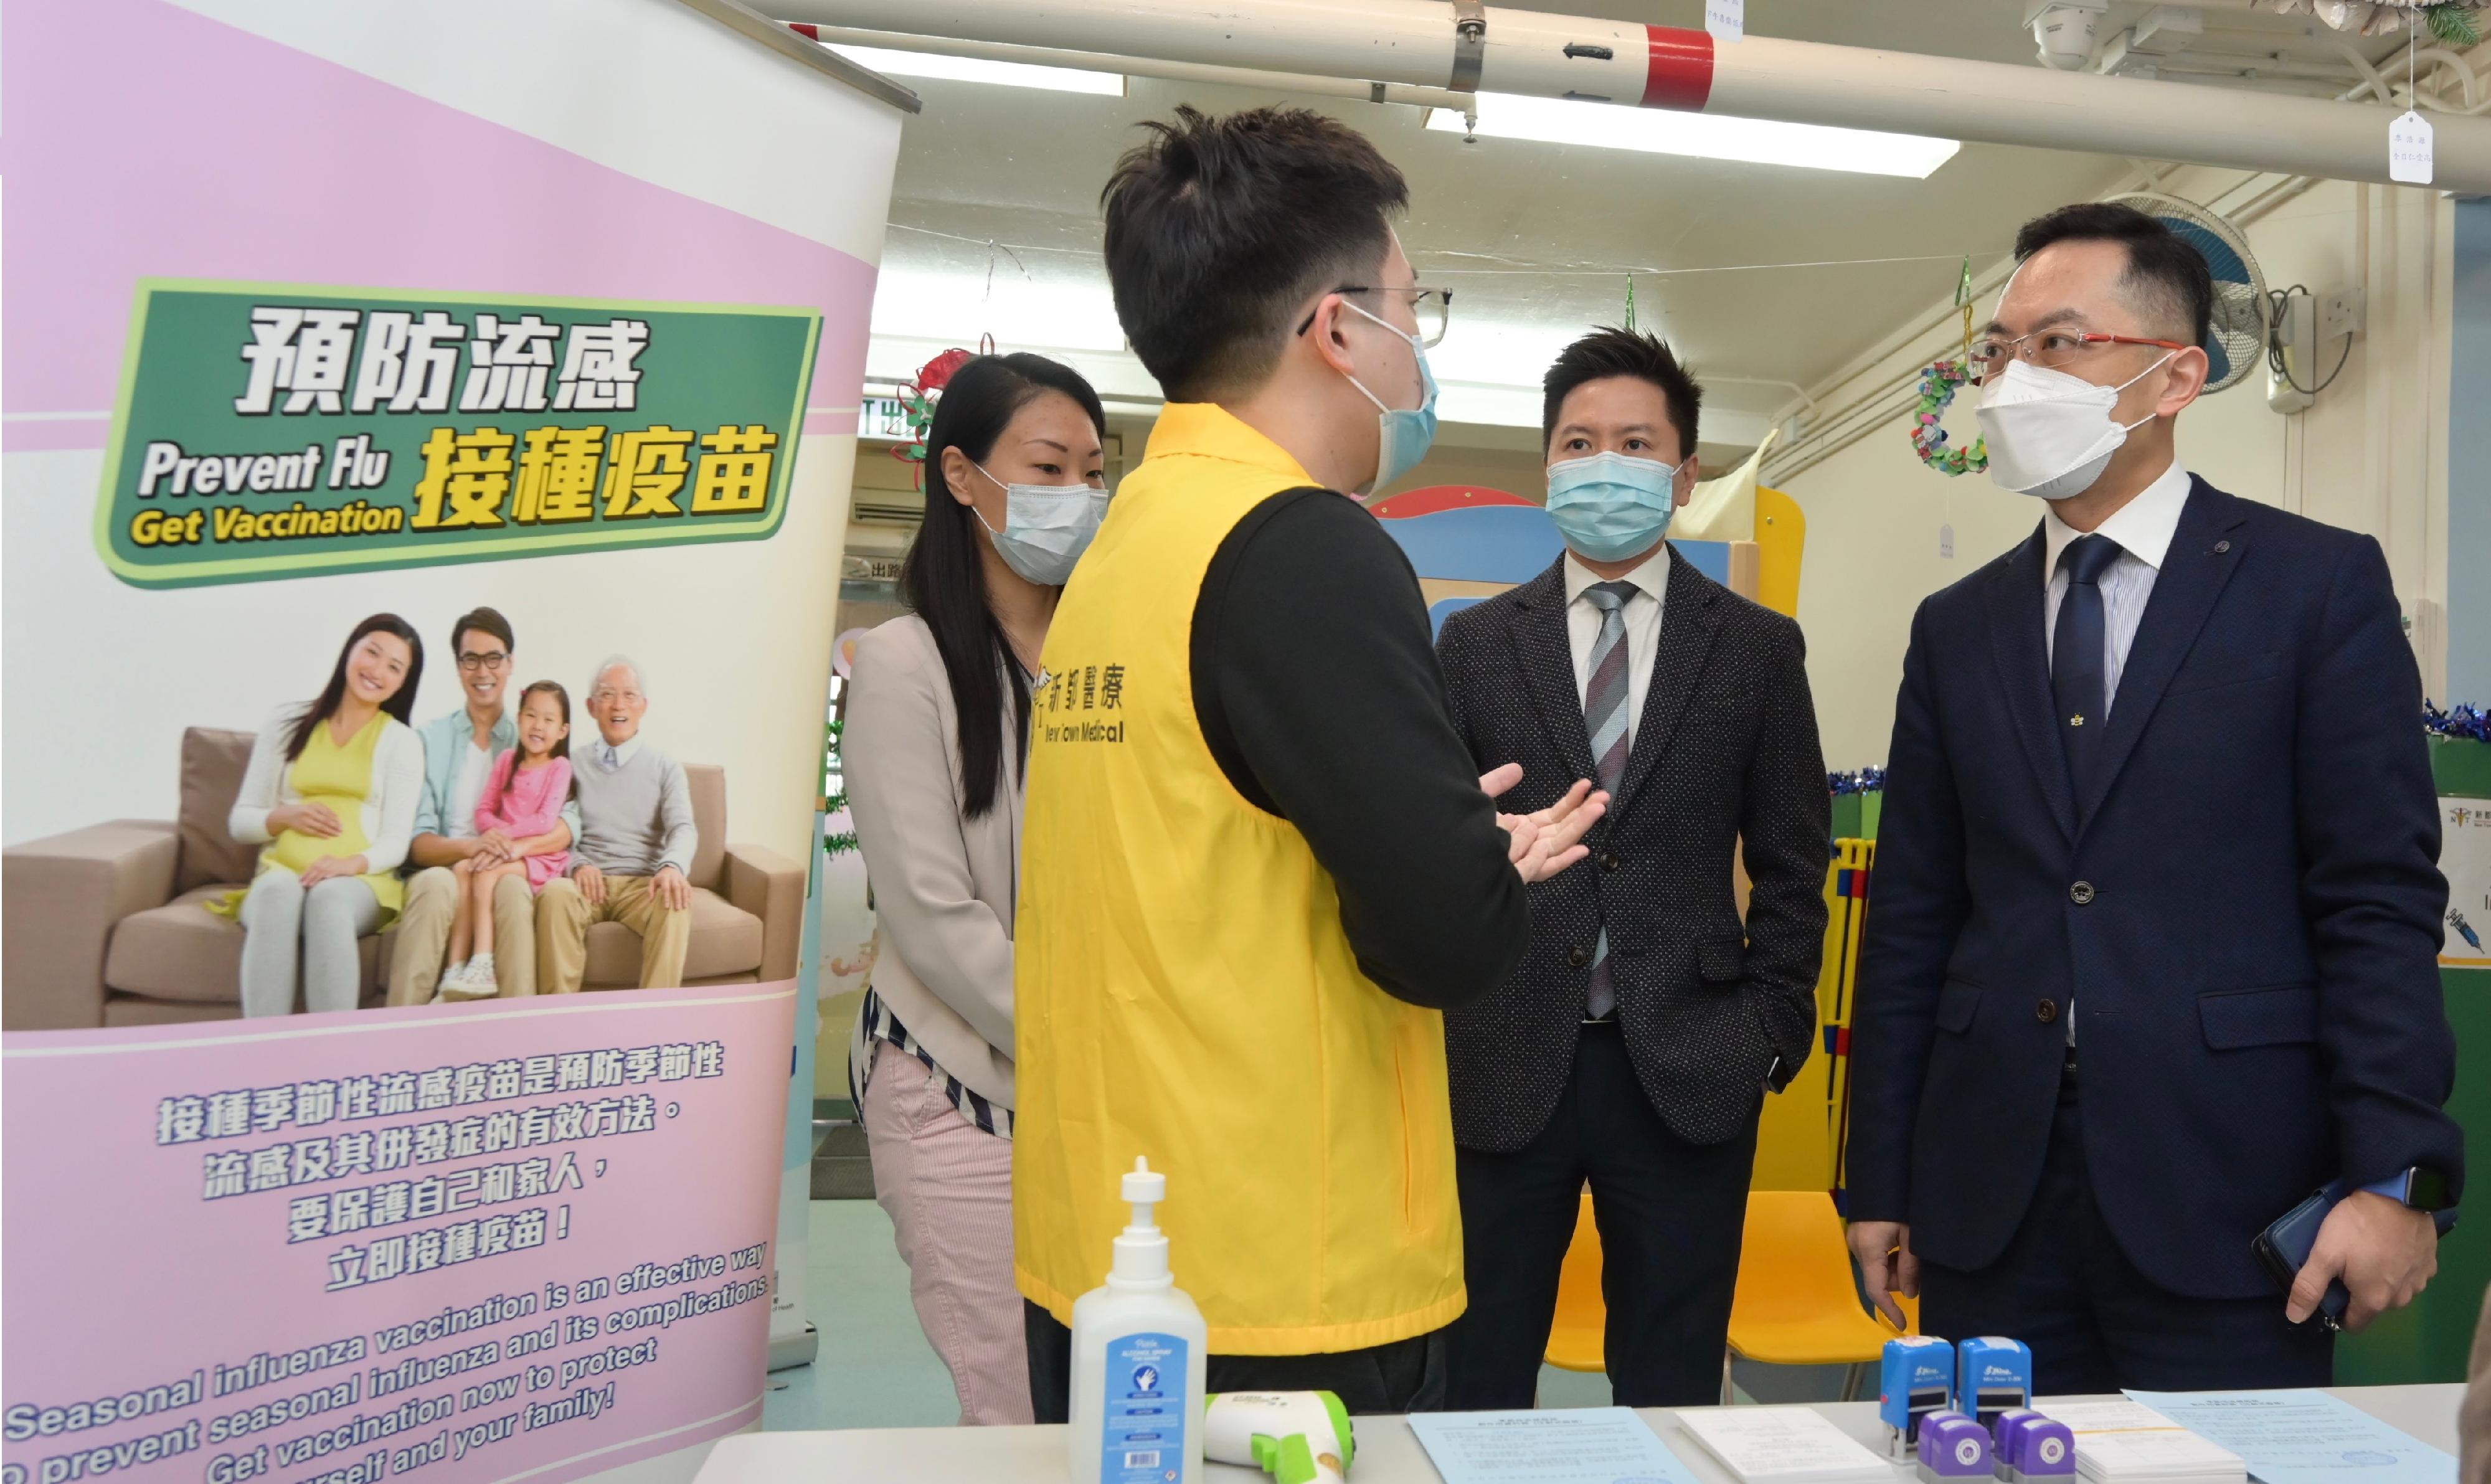 The Director of Health, Dr Ronald Lam, and the Controller of the Centre for Health Protection of the Department of Health, Dr Edwin Tsui, this morning (December 15) visited St Thomas' Church Kindergarten in Shek Kip Mei to view the implementation of the school outreach seasonal influenza vaccination service. Photo shows Dr Lam (first right) and Dr Tsui (second right) chatting with a Public-Private-Partnership Team member (second left) providing the vaccination service to schoolchildren on-site to better understand the team's work.